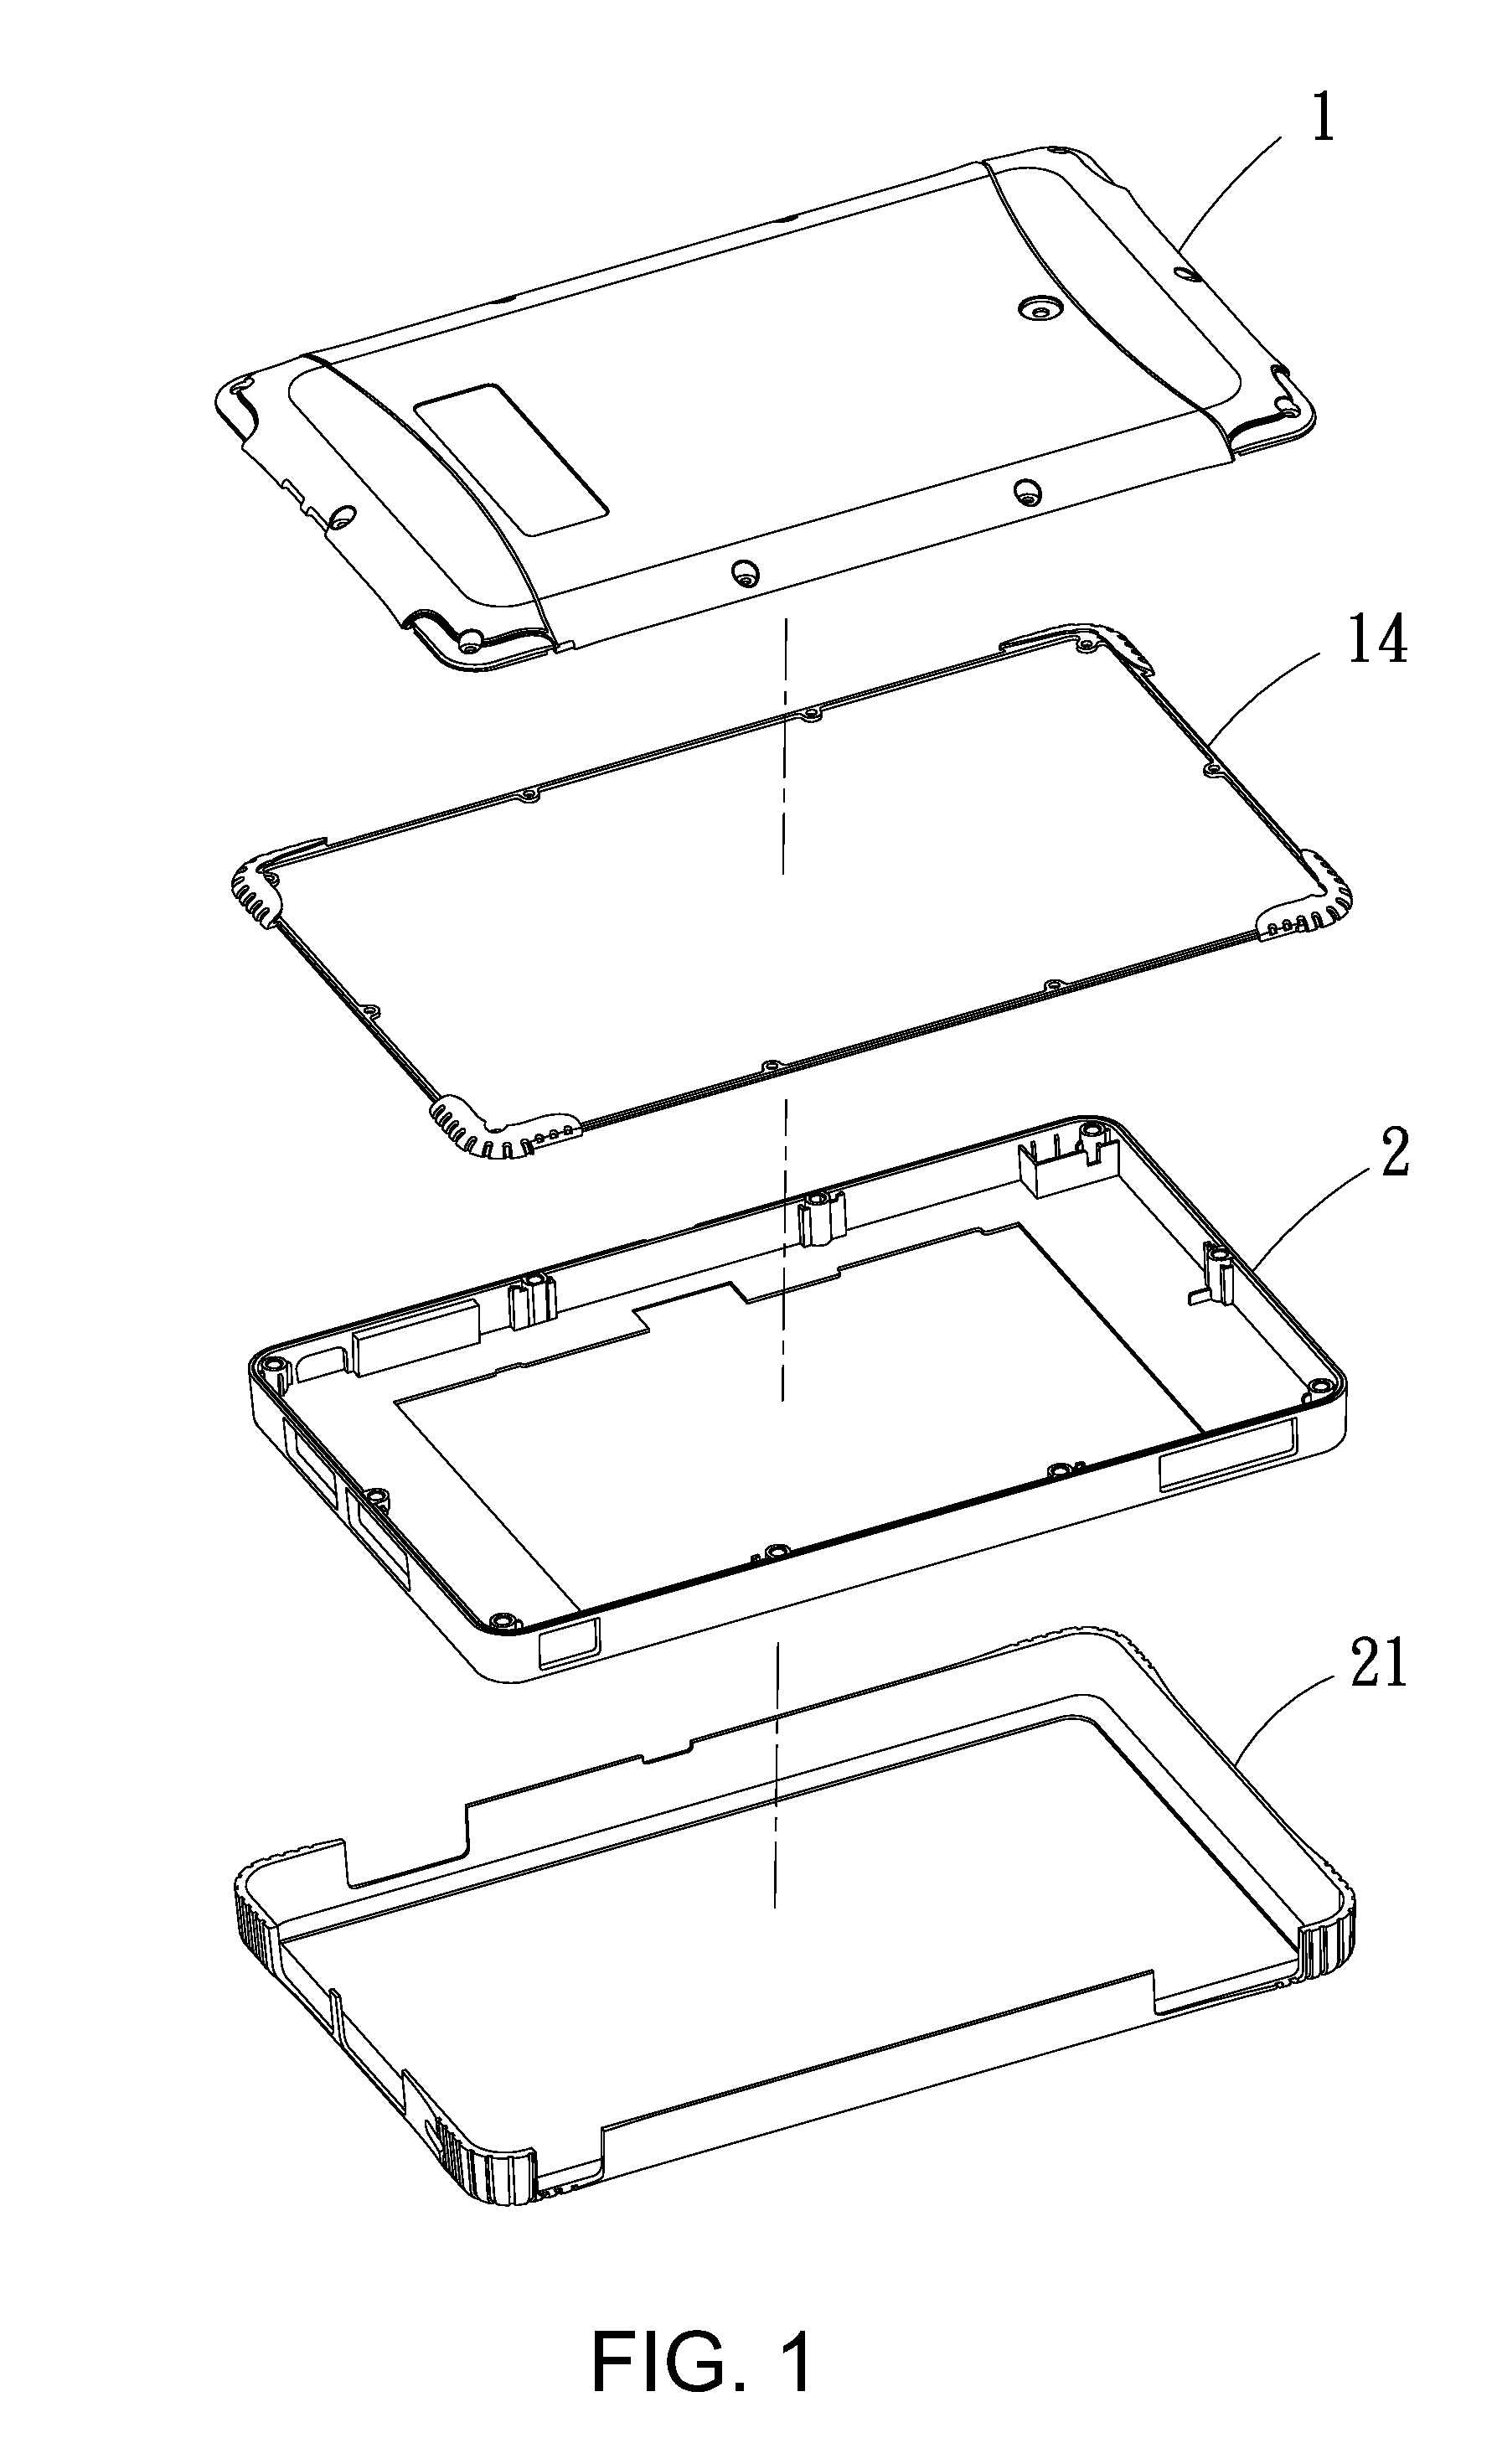 Waterproof, shockproof container for handheld electronic device